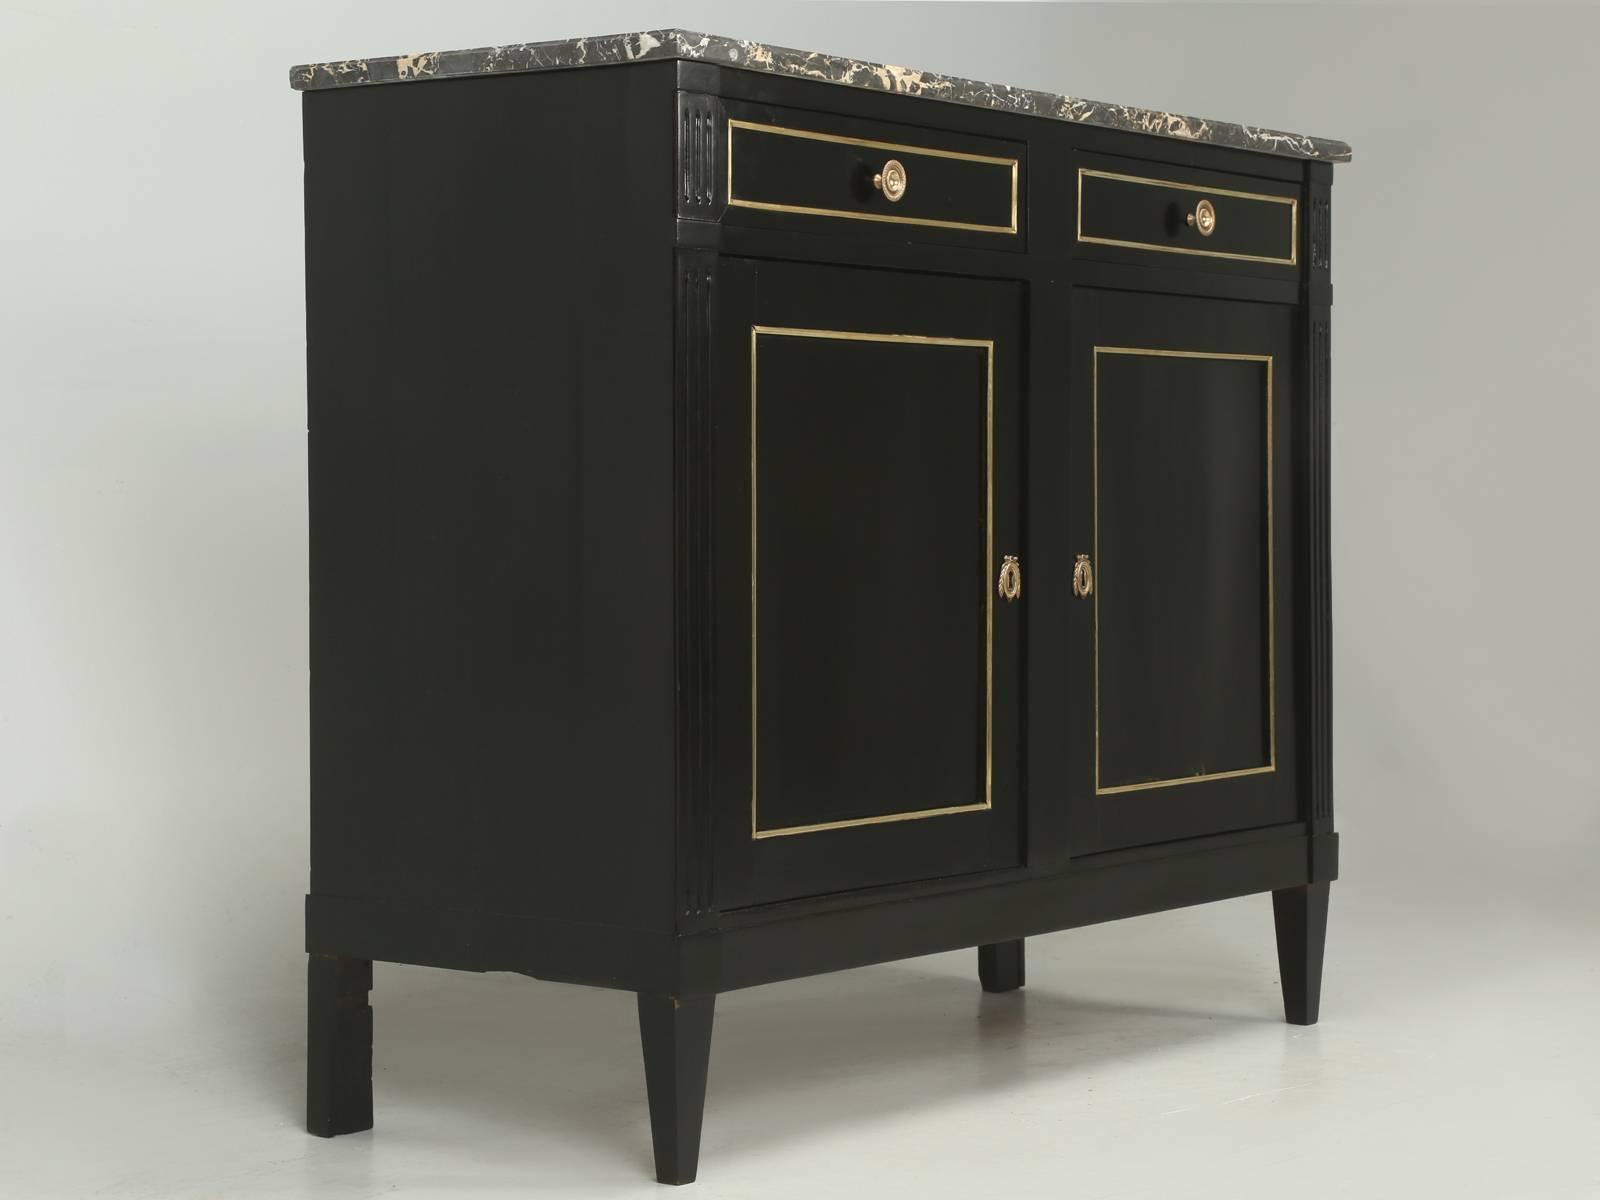 Antique French Louis XVI style buffet, redone in a correctly applied ebonized finish. Our old plank workshop, hand-scrapped the entire buffet and applied layer, upon layer of different stains, to match the appearance of a real antique ebony finish.